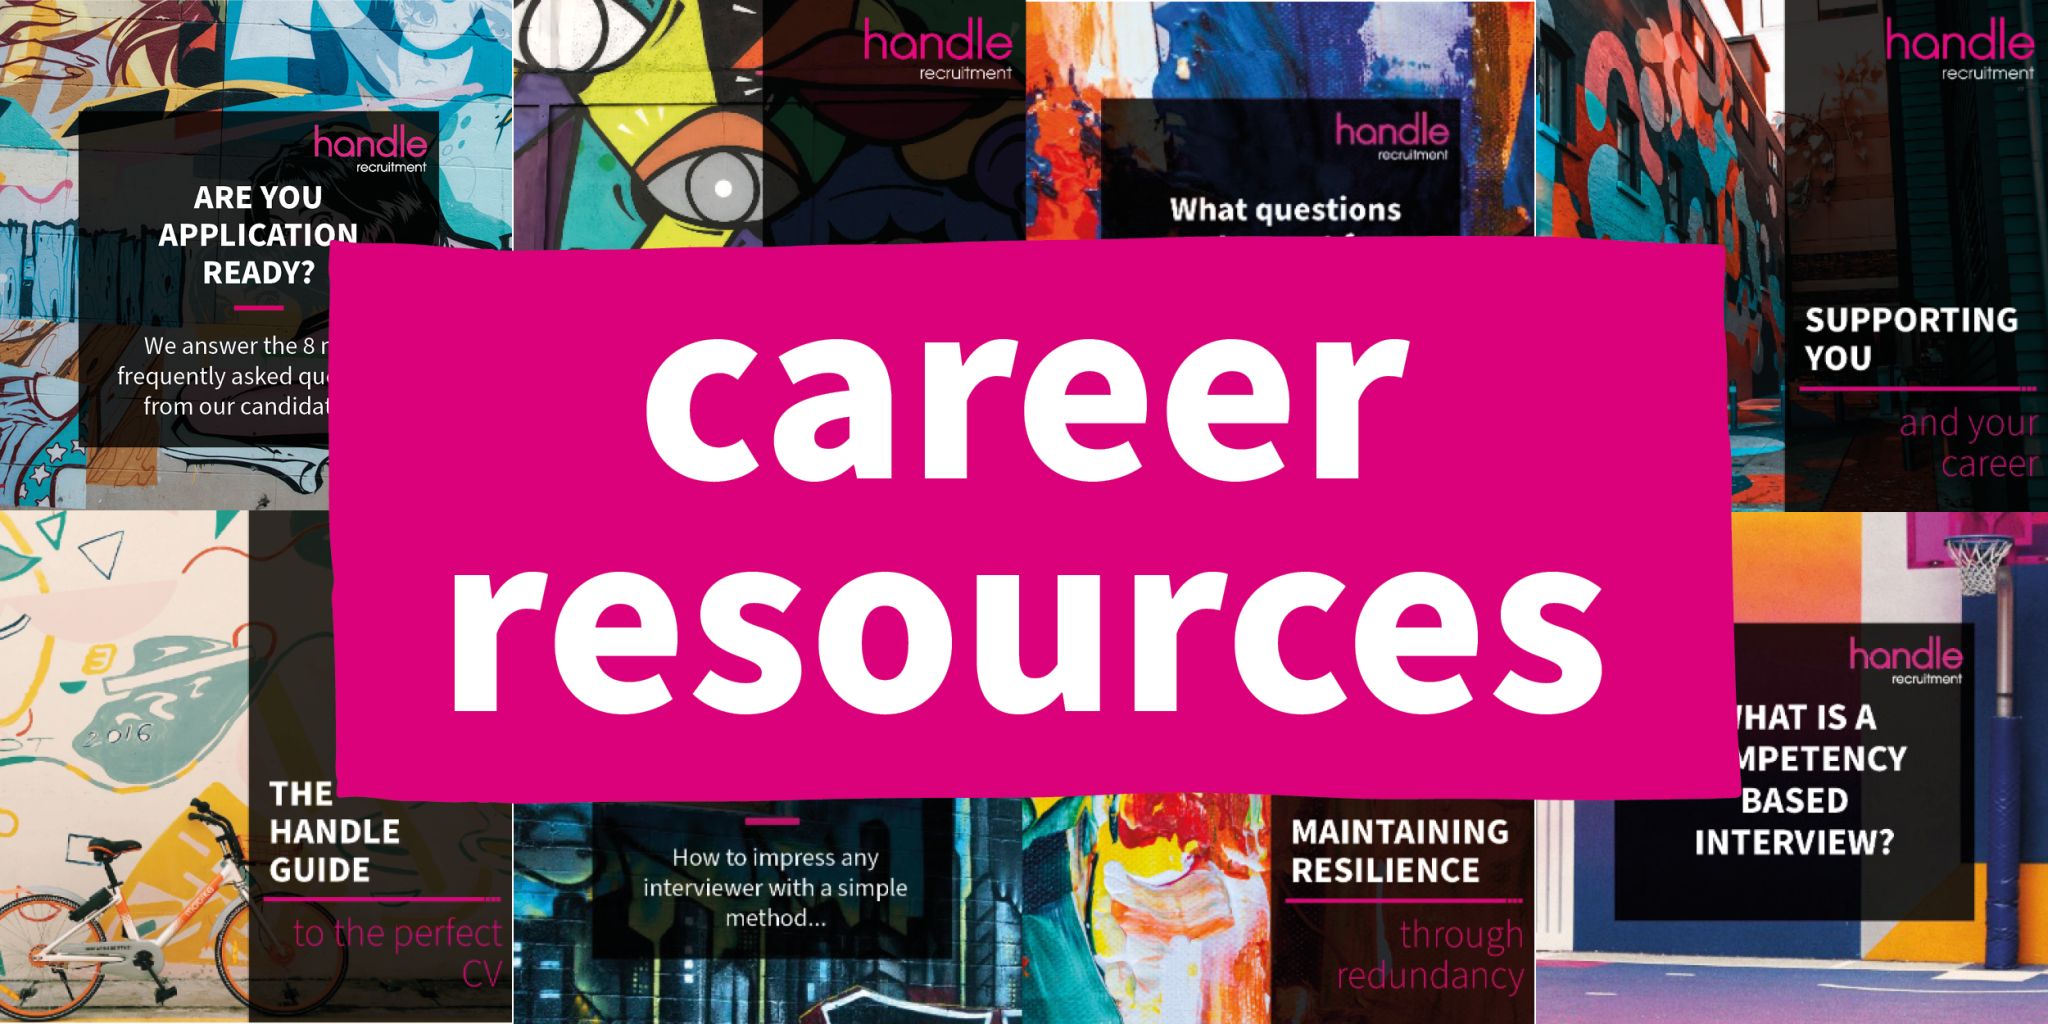 Career resources: what is the STAR Response?